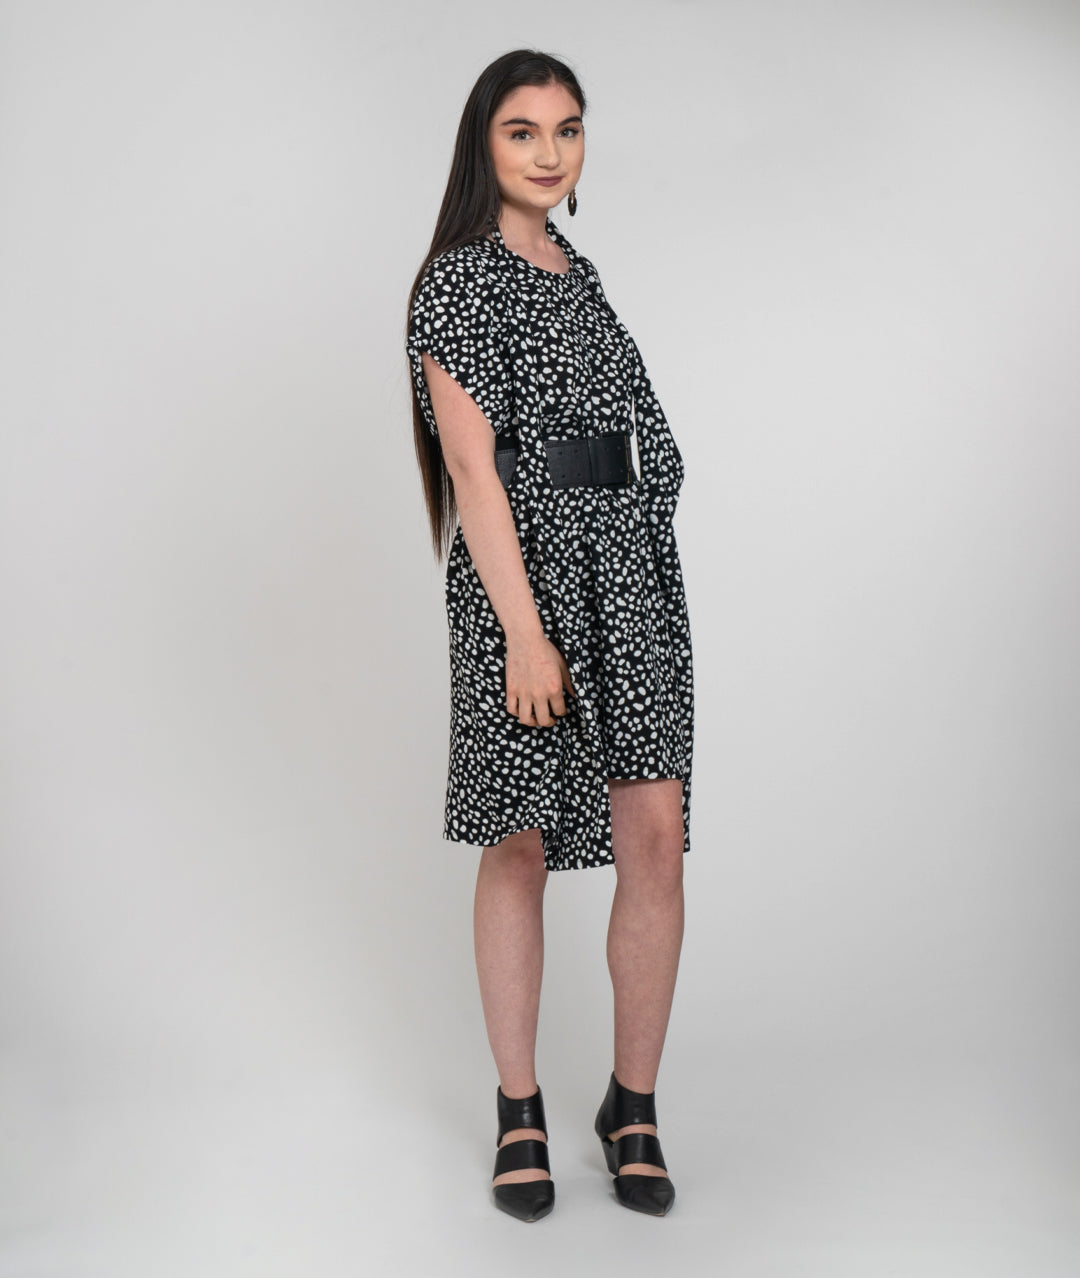 model in a black and white dot print dress with a halter style strap coming from the side panels to around her neck